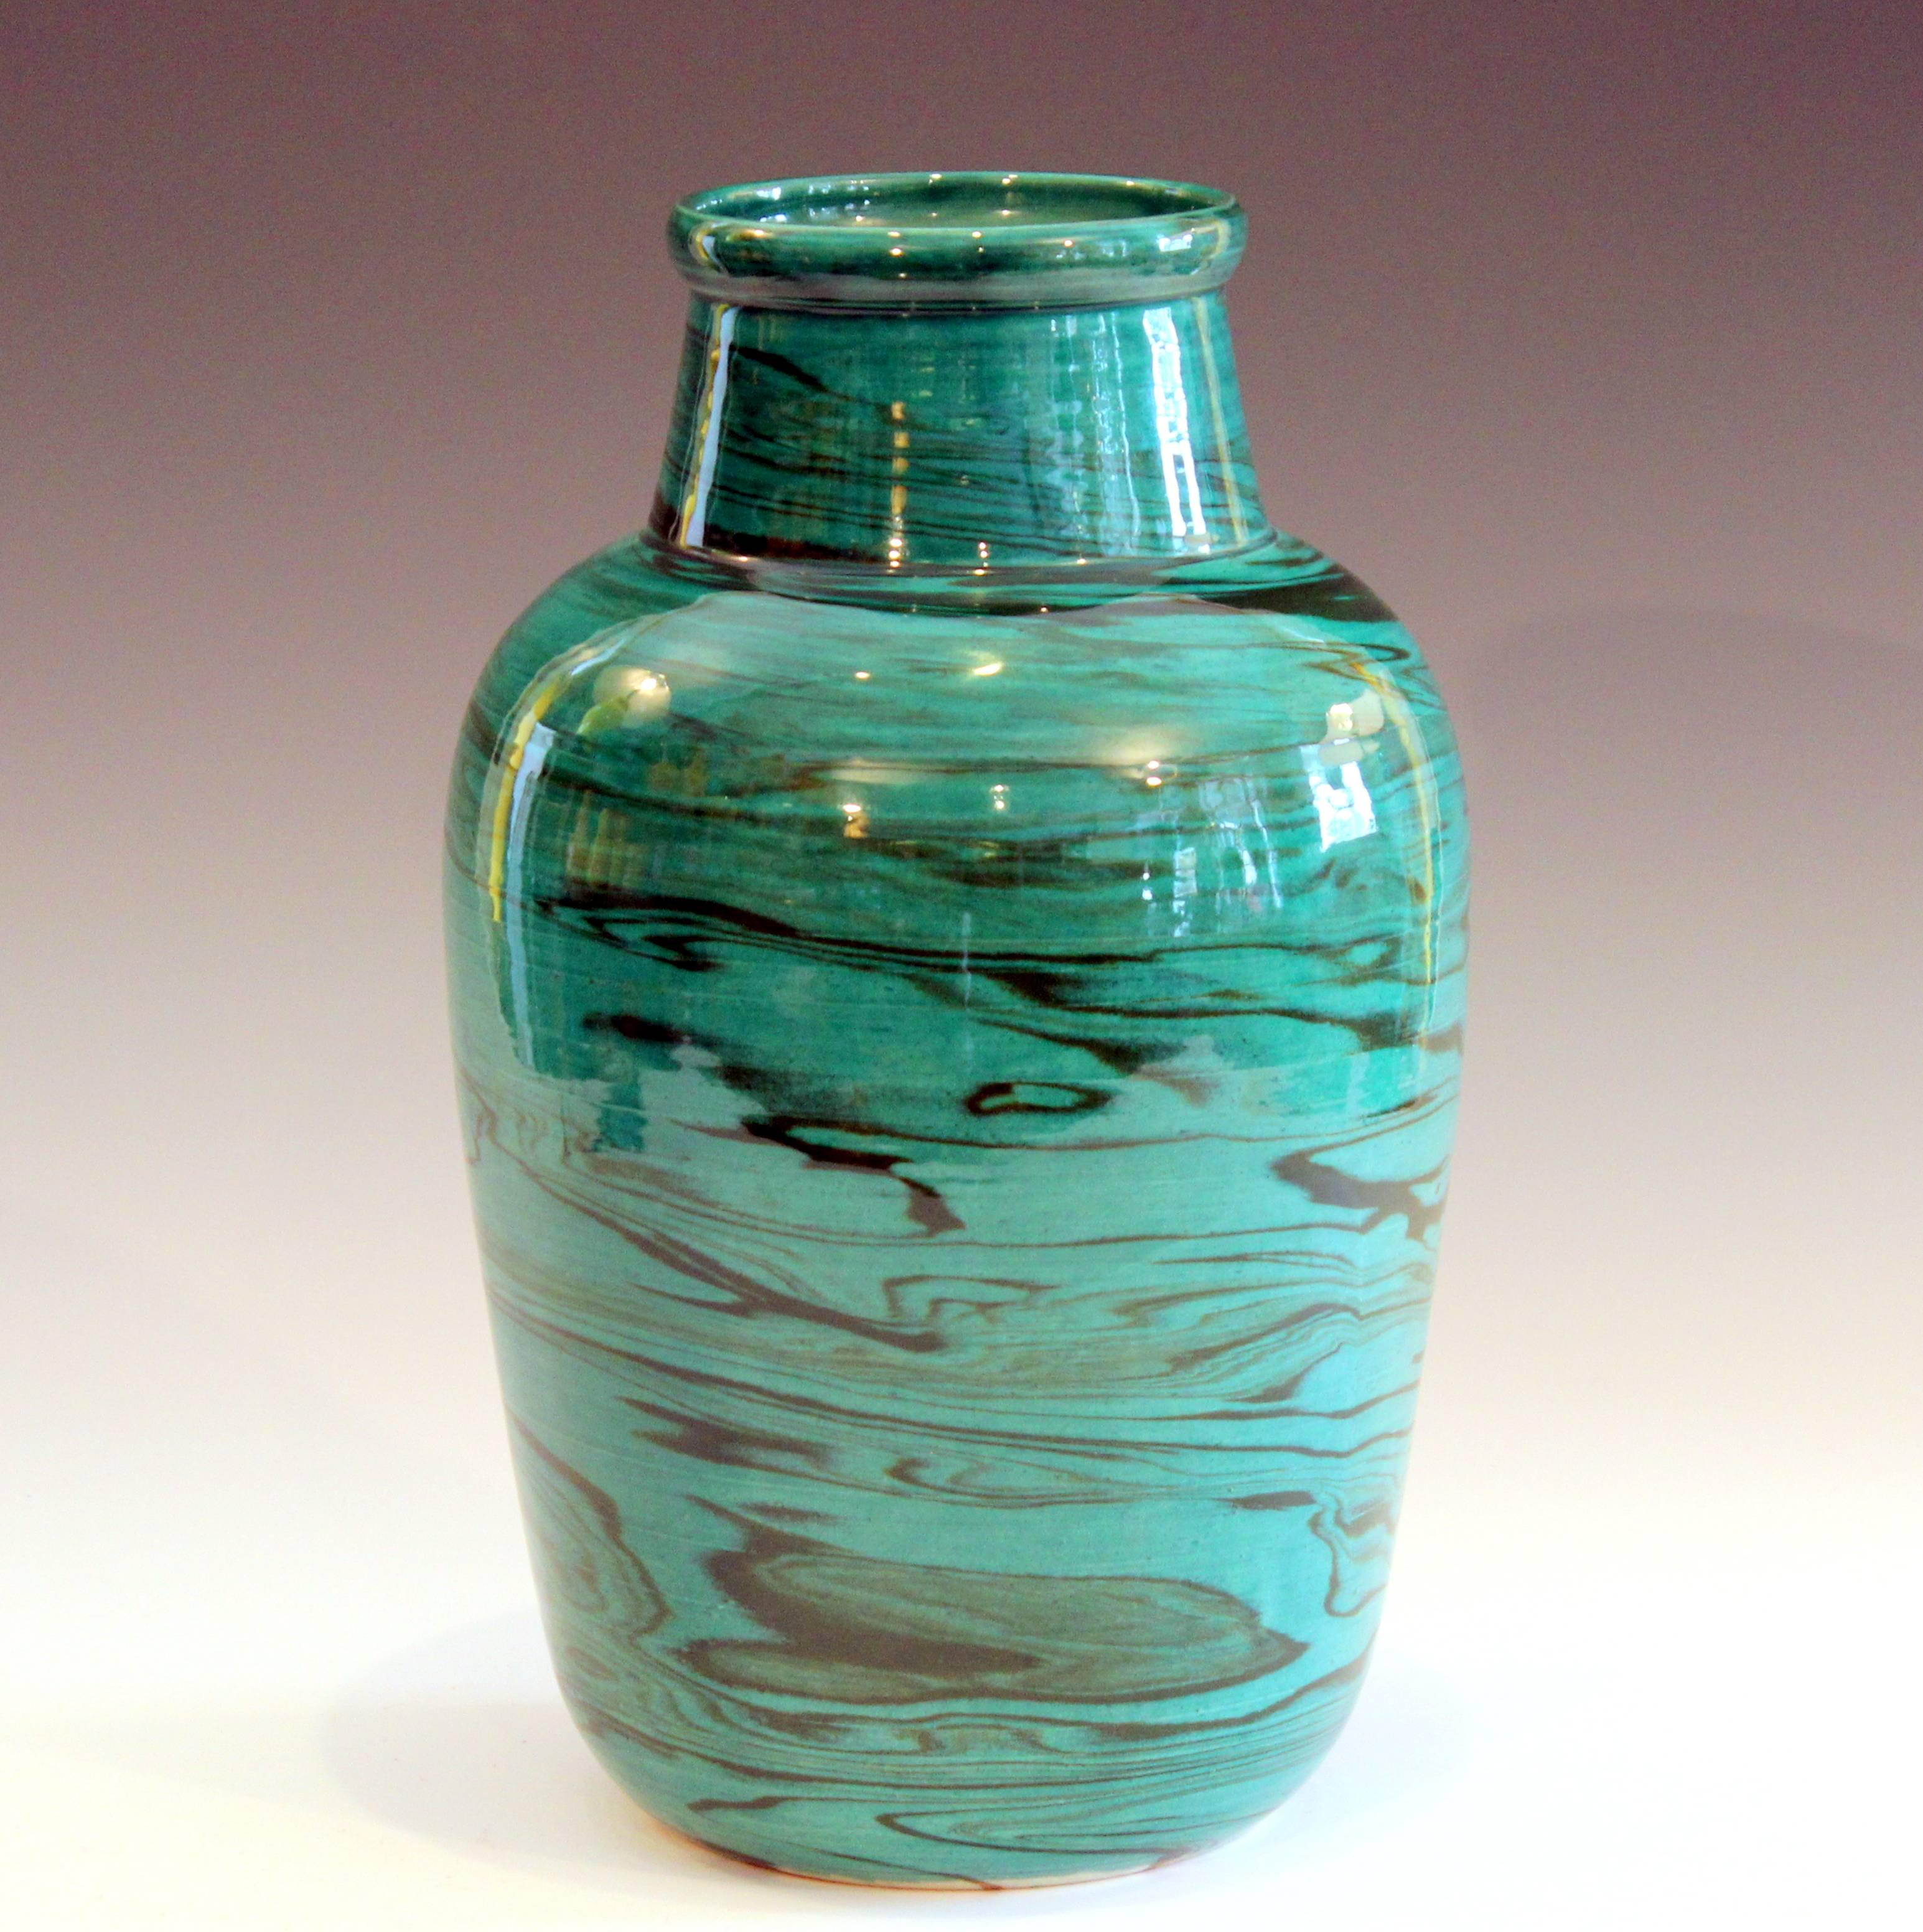 Large Bitossi vase in green marbleized pattern with good contrasts, circa 1970s. Measures: 12